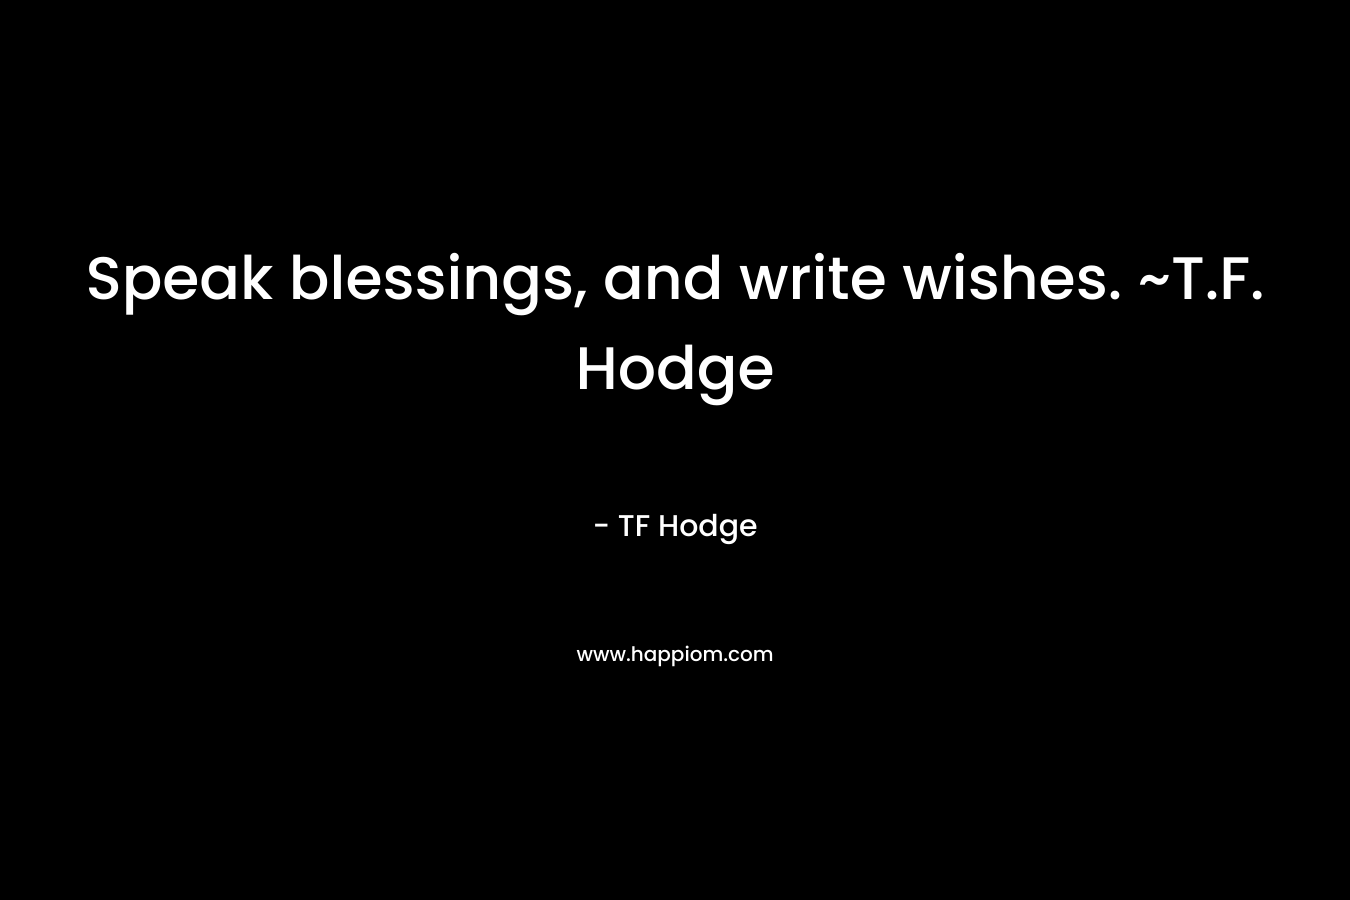 Speak blessings, and write wishes. ~T.F. Hodge